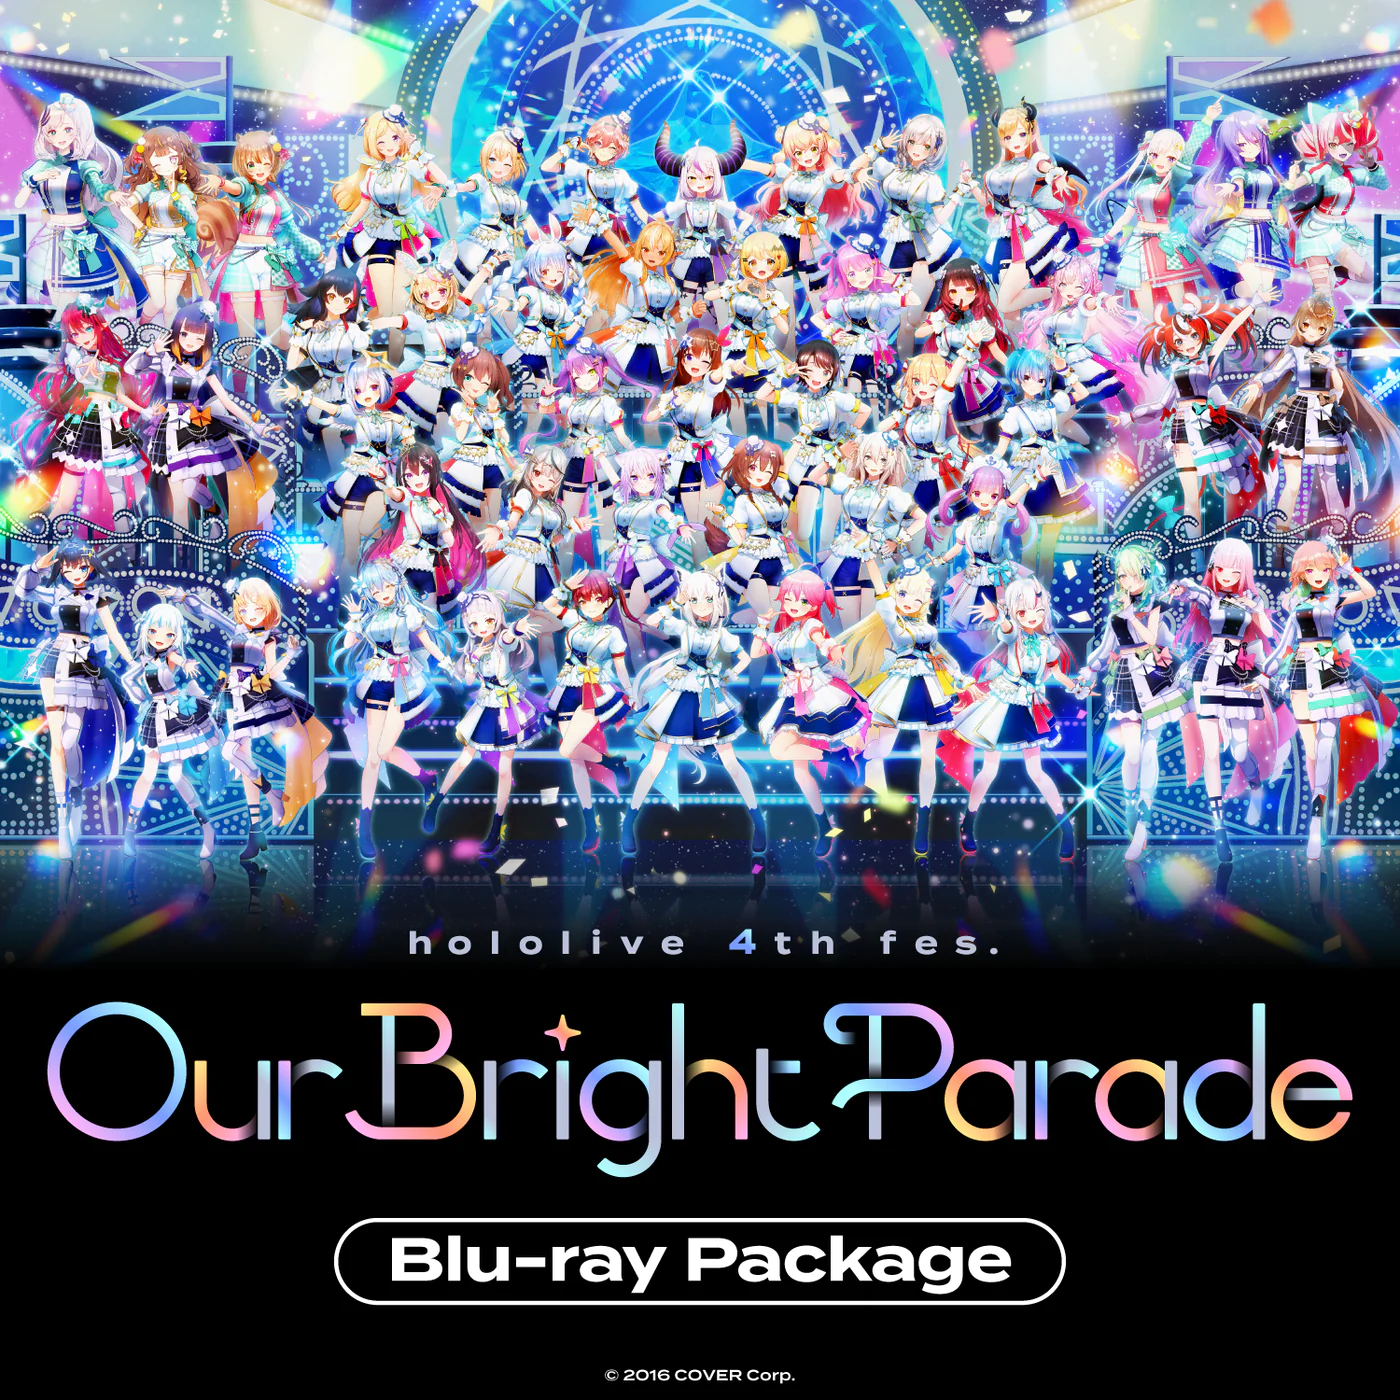 [Pre-order] "hololive 4th fes. Our Bright Parade" Blu-ray